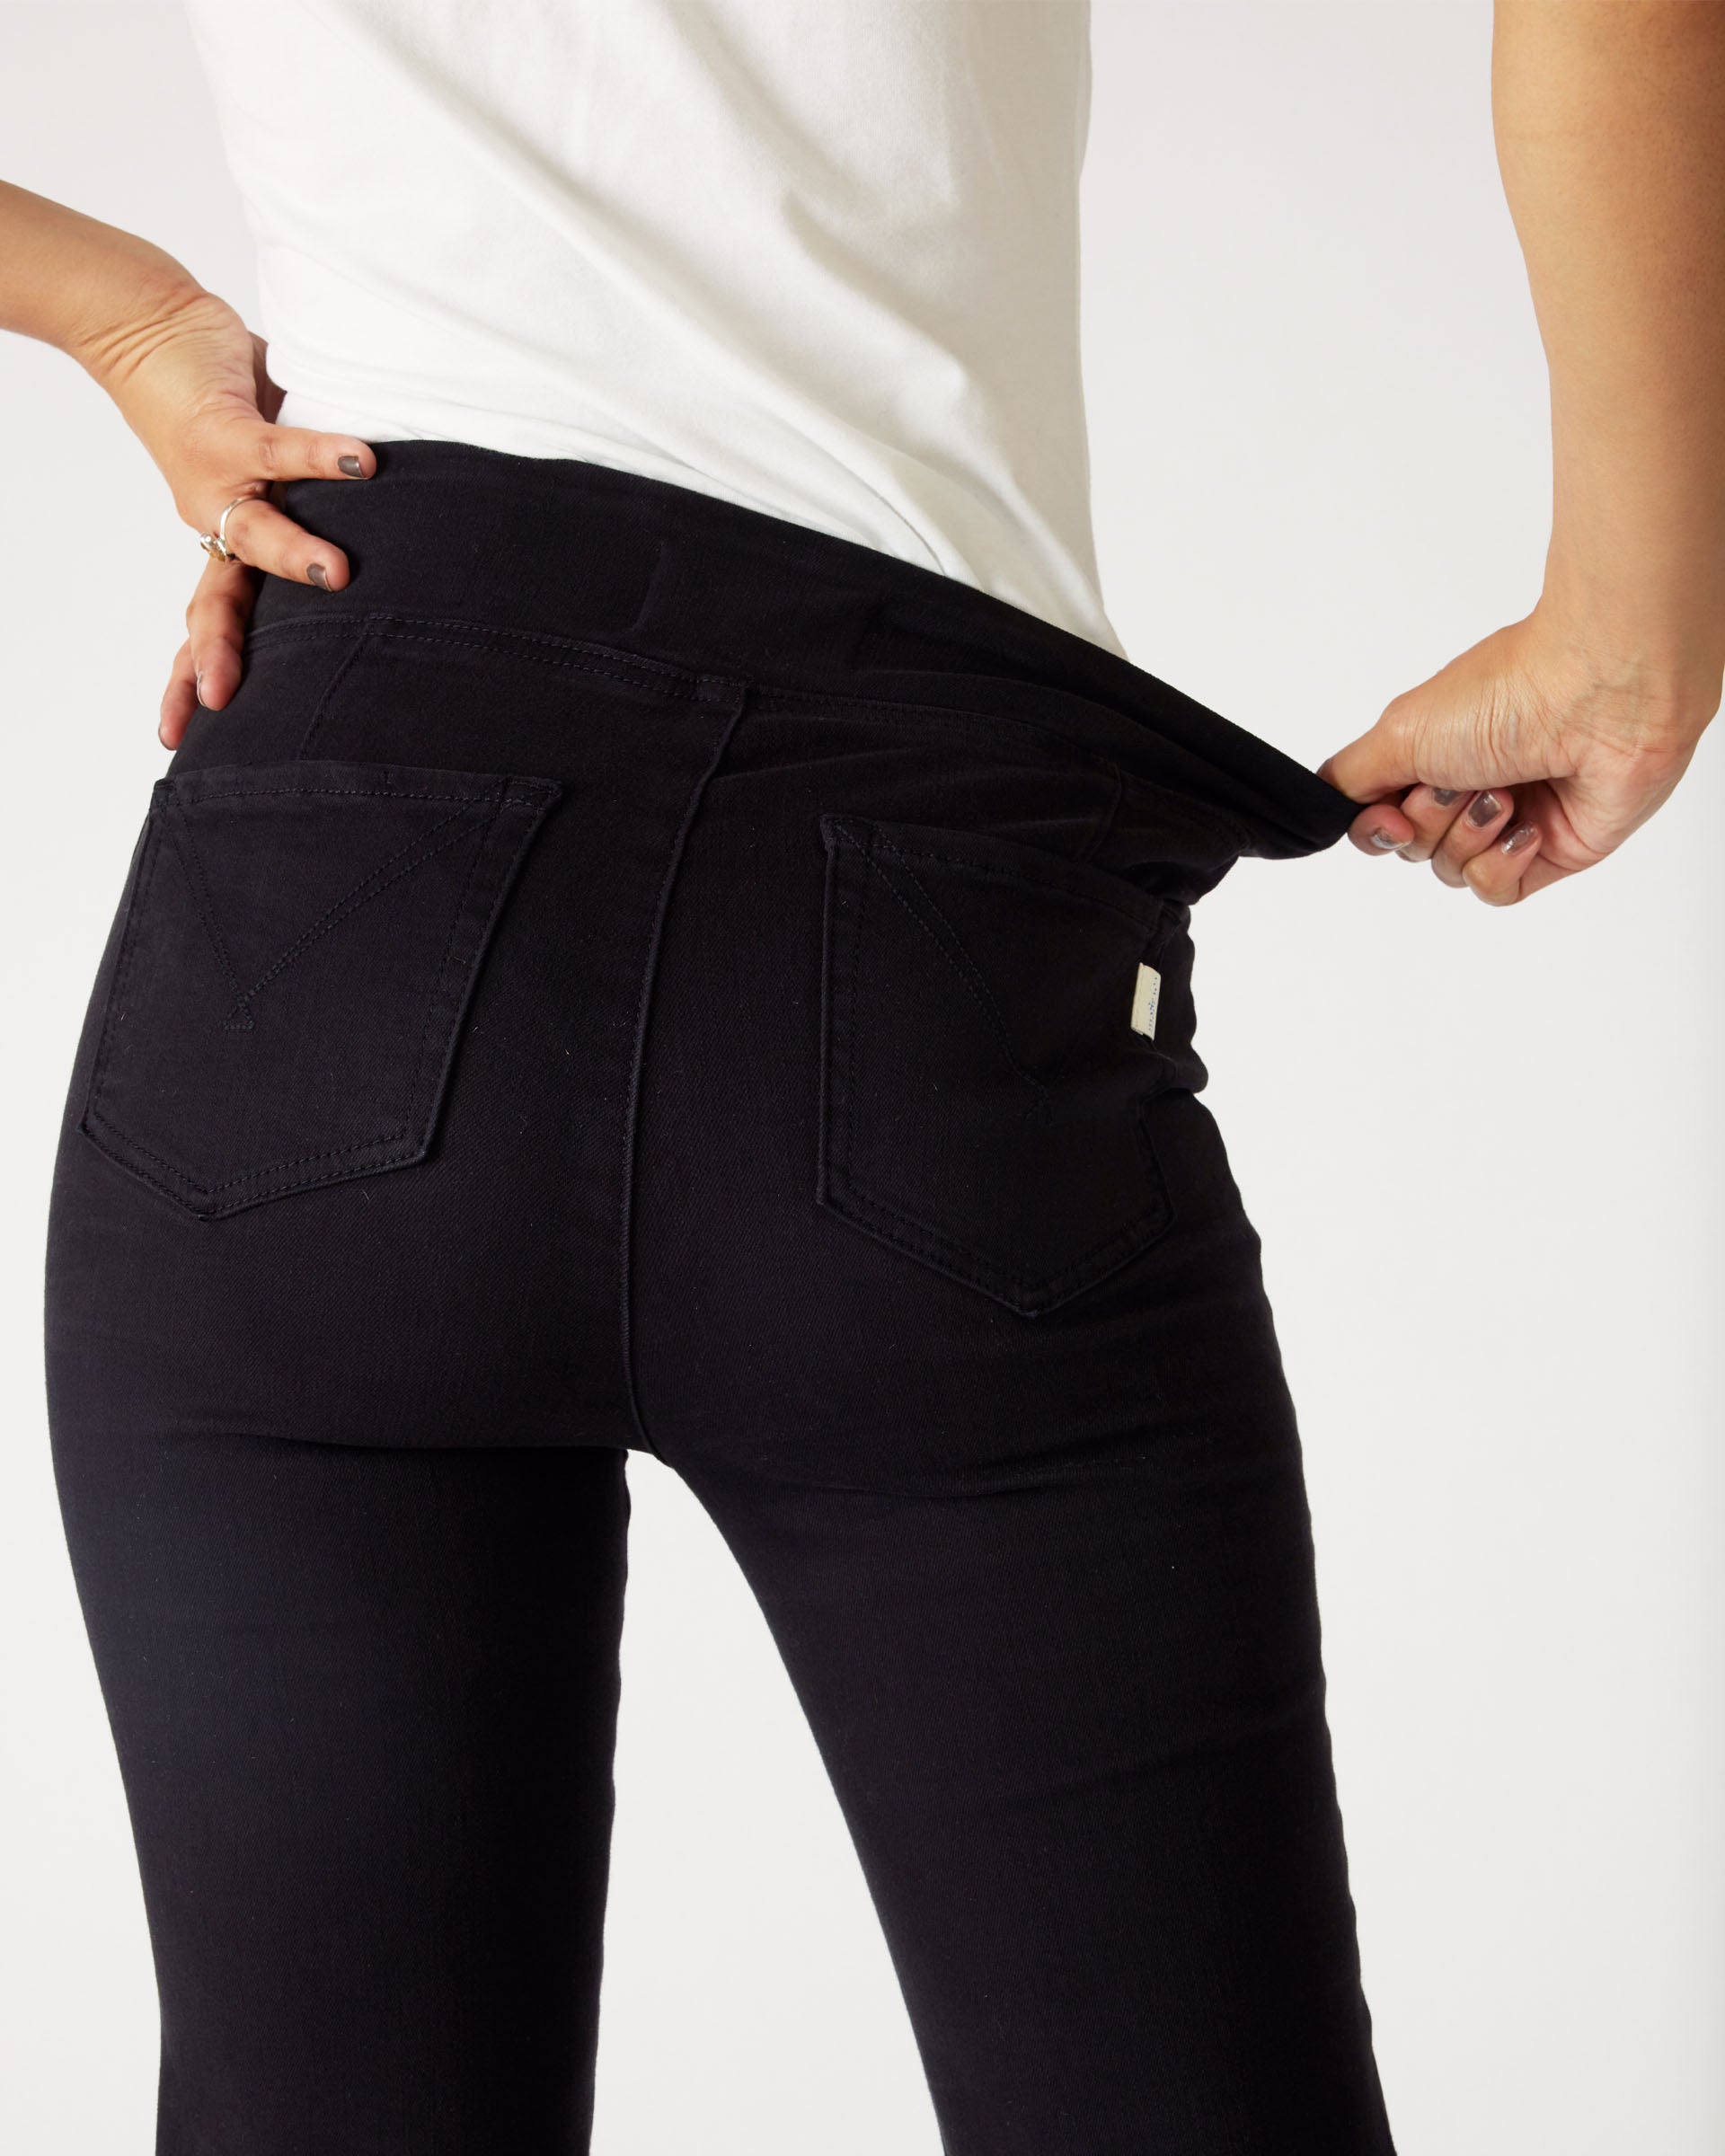 Rear view of Woman showcasing stretch waist on  Mersea Nomad black denim full length boot-cut jeans on a white background